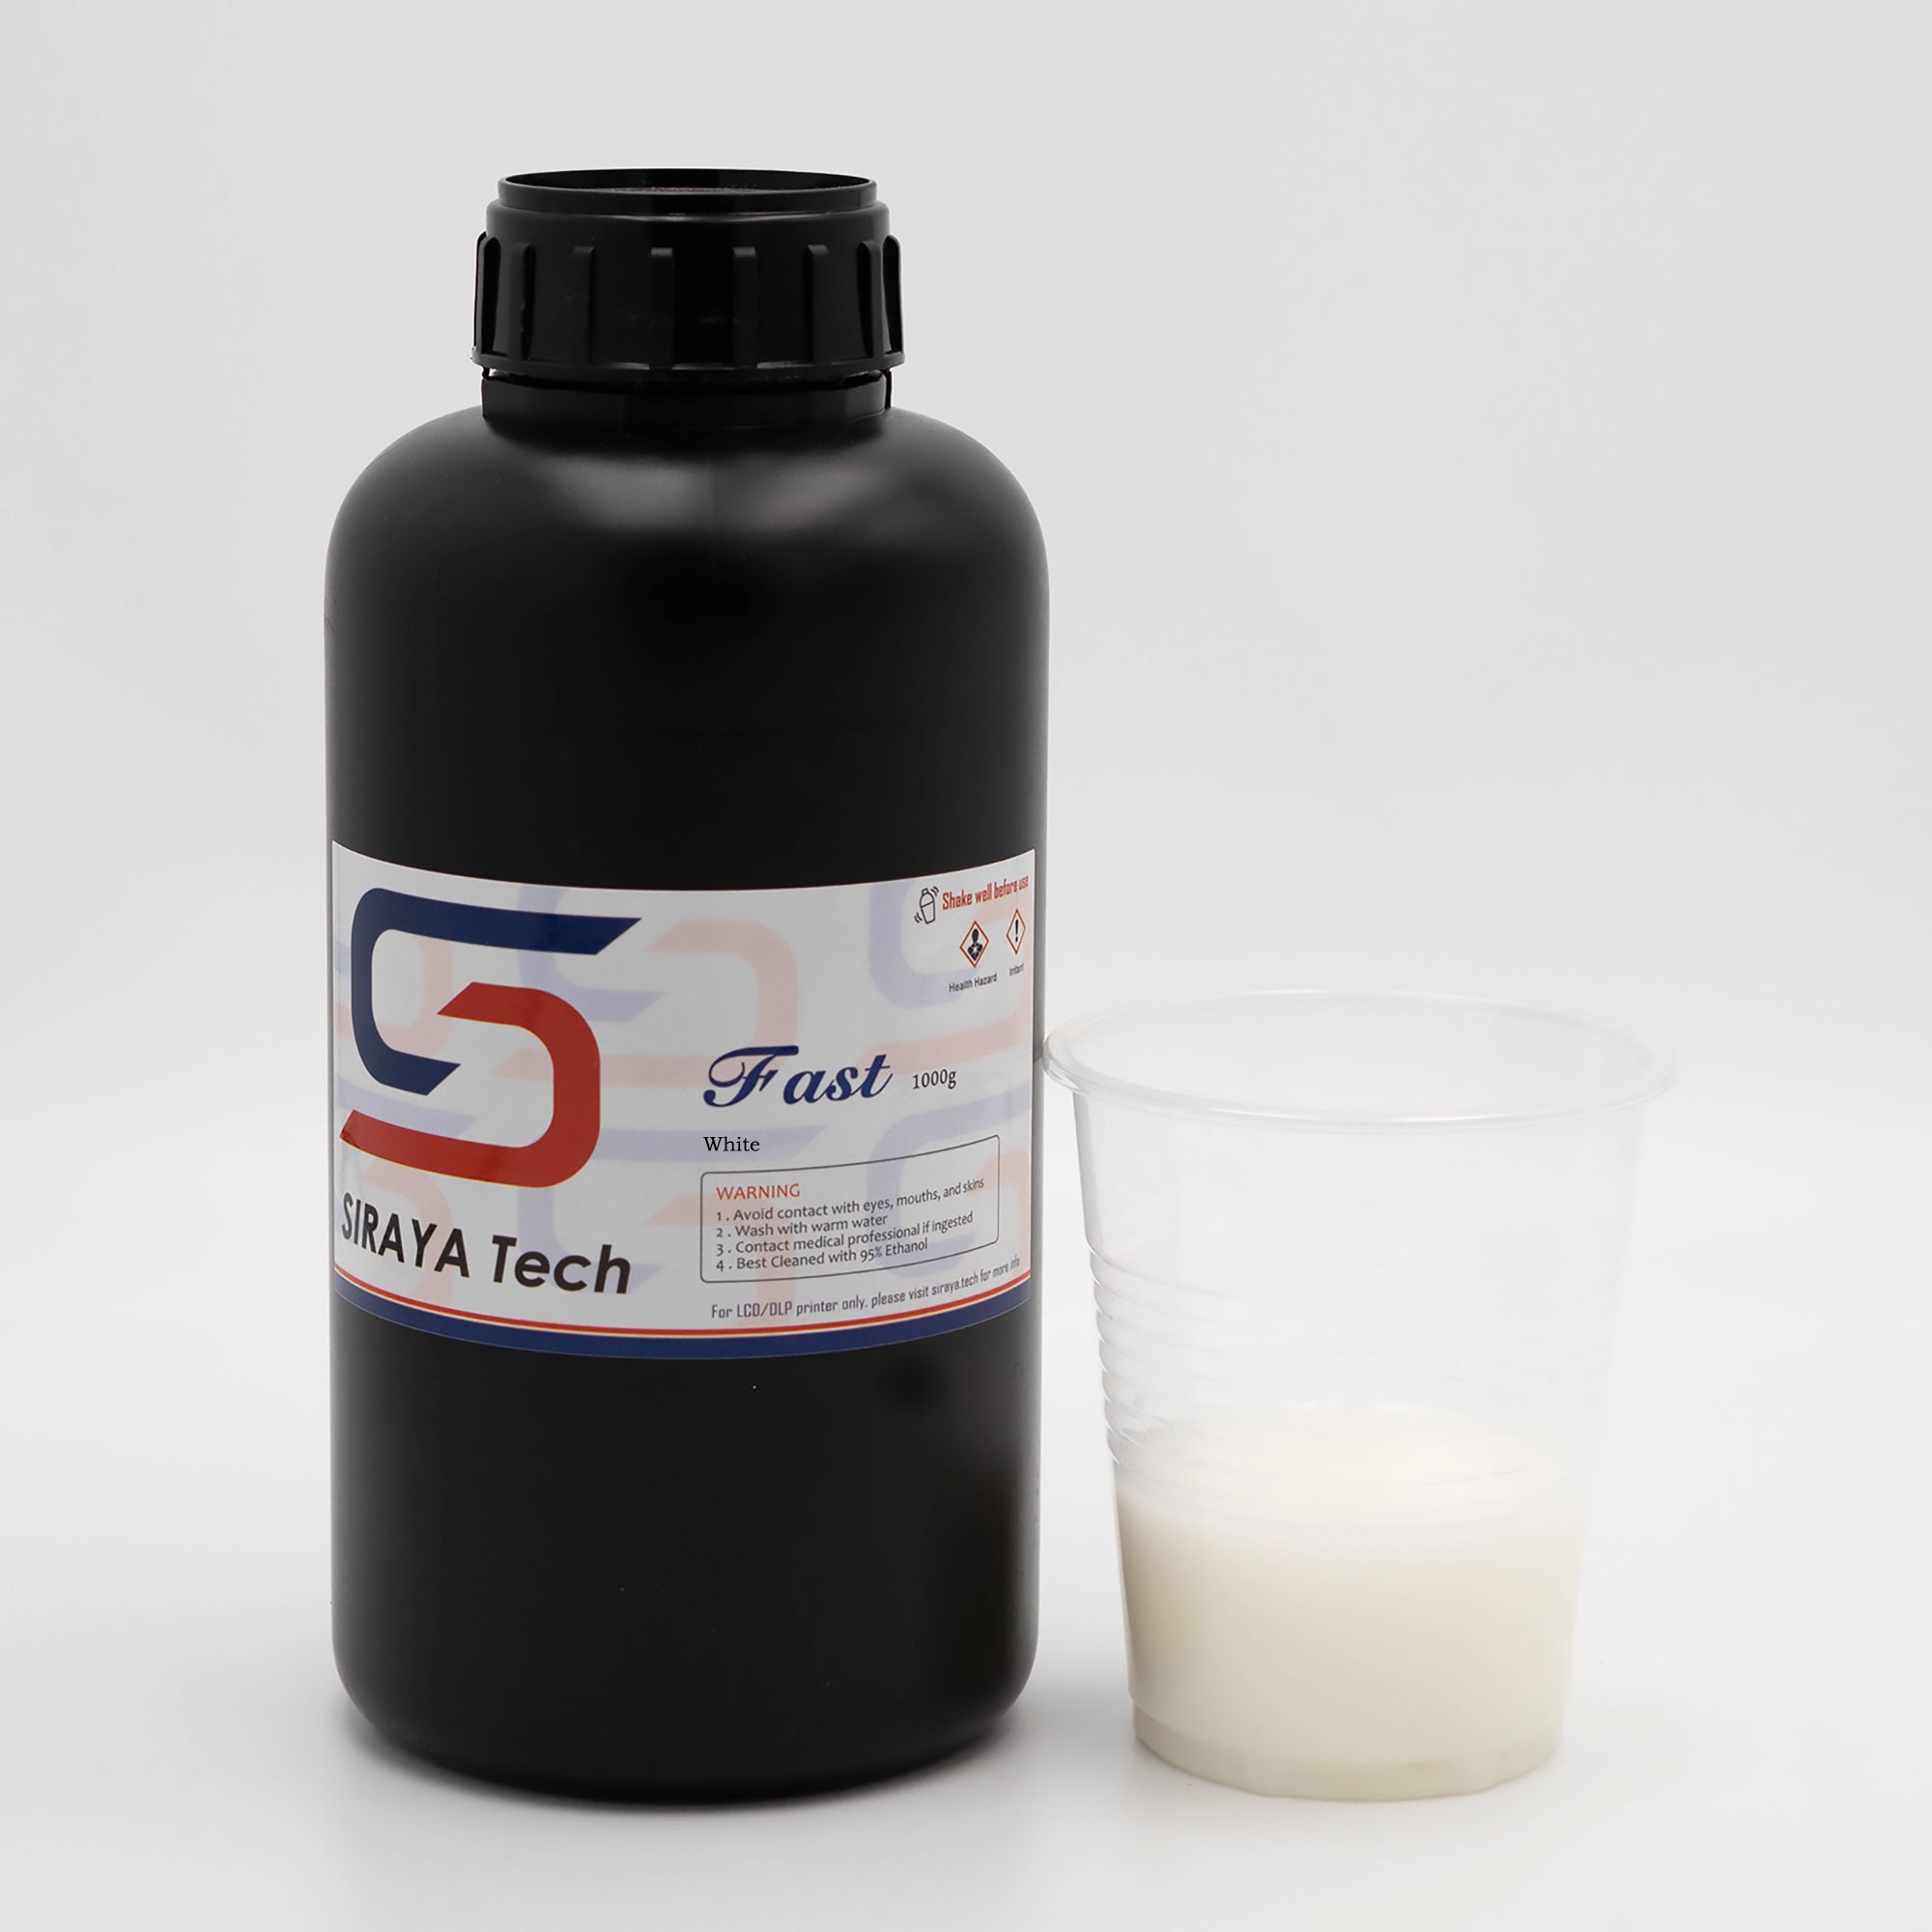 Fast White by Siraya Tech (1kg for US)